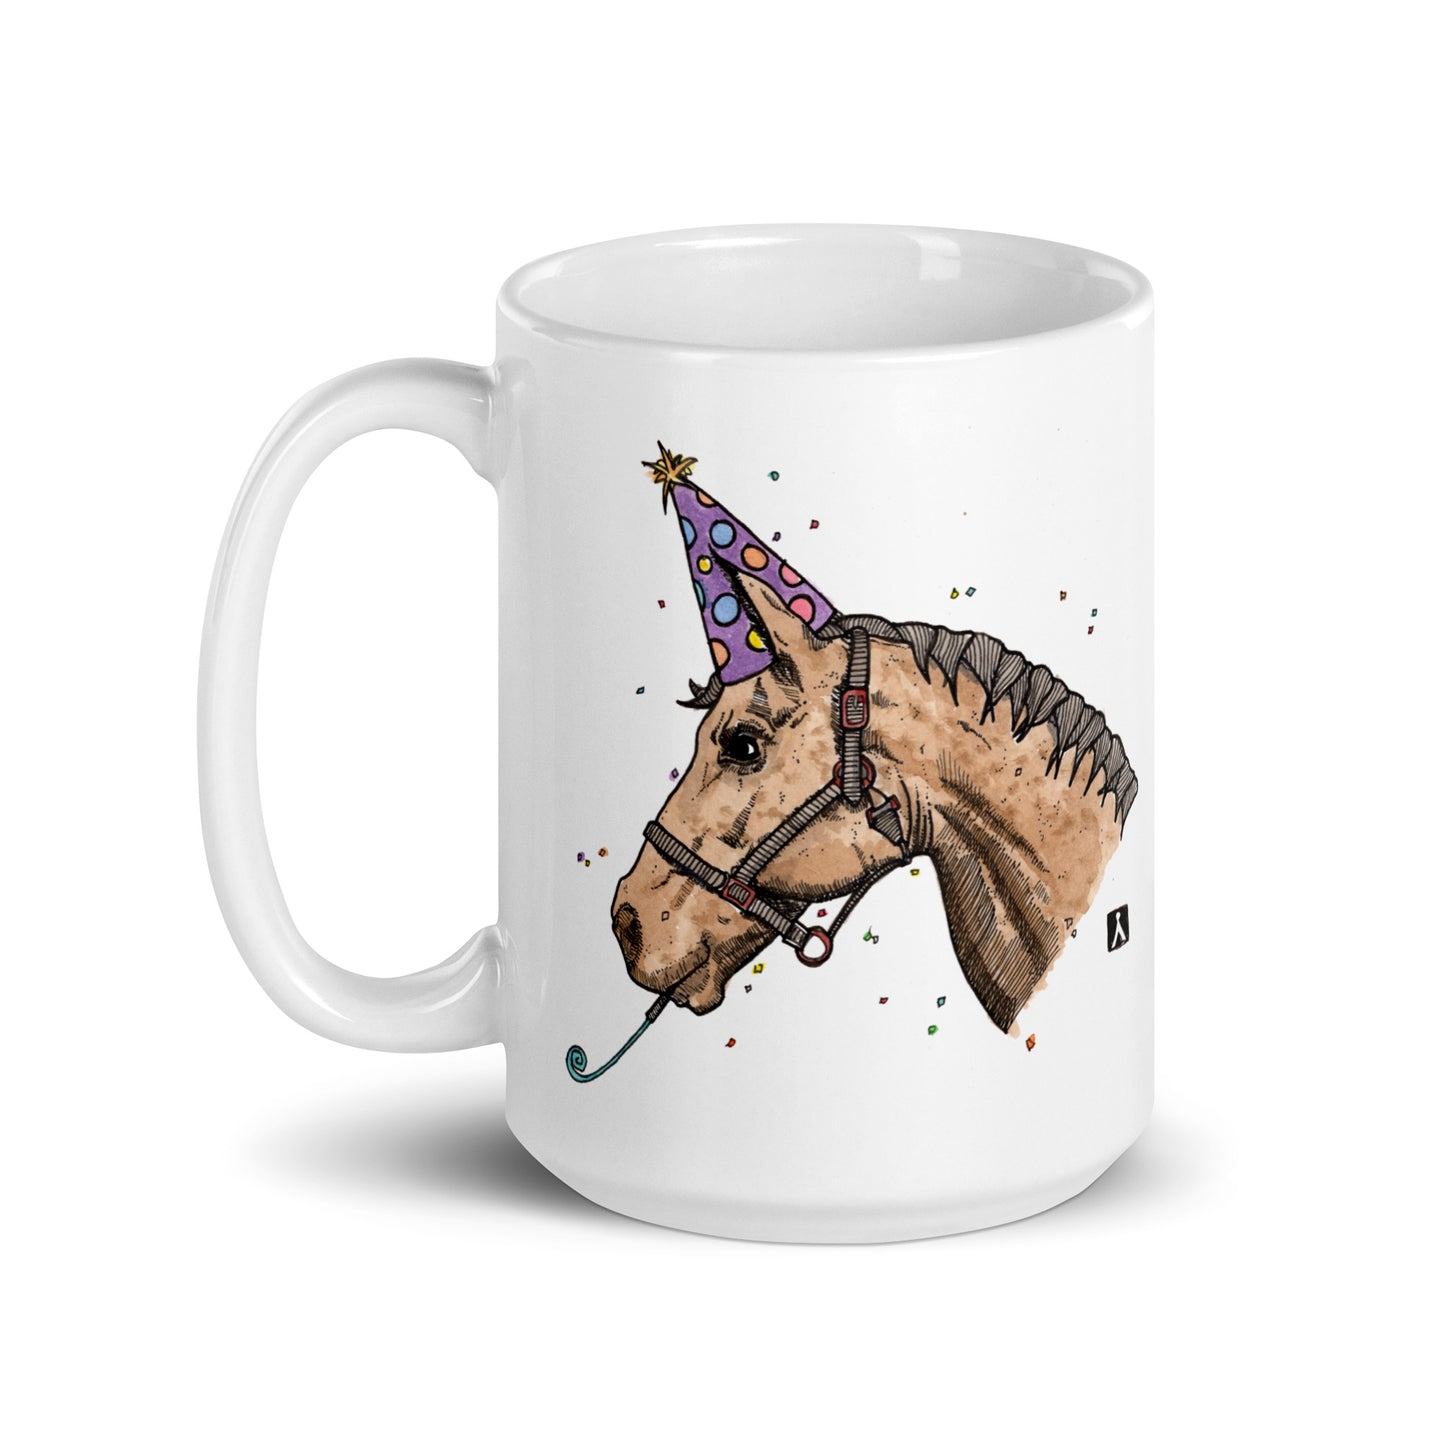 BellavanceInk: Coffee Mug With Horse Ready For A Party